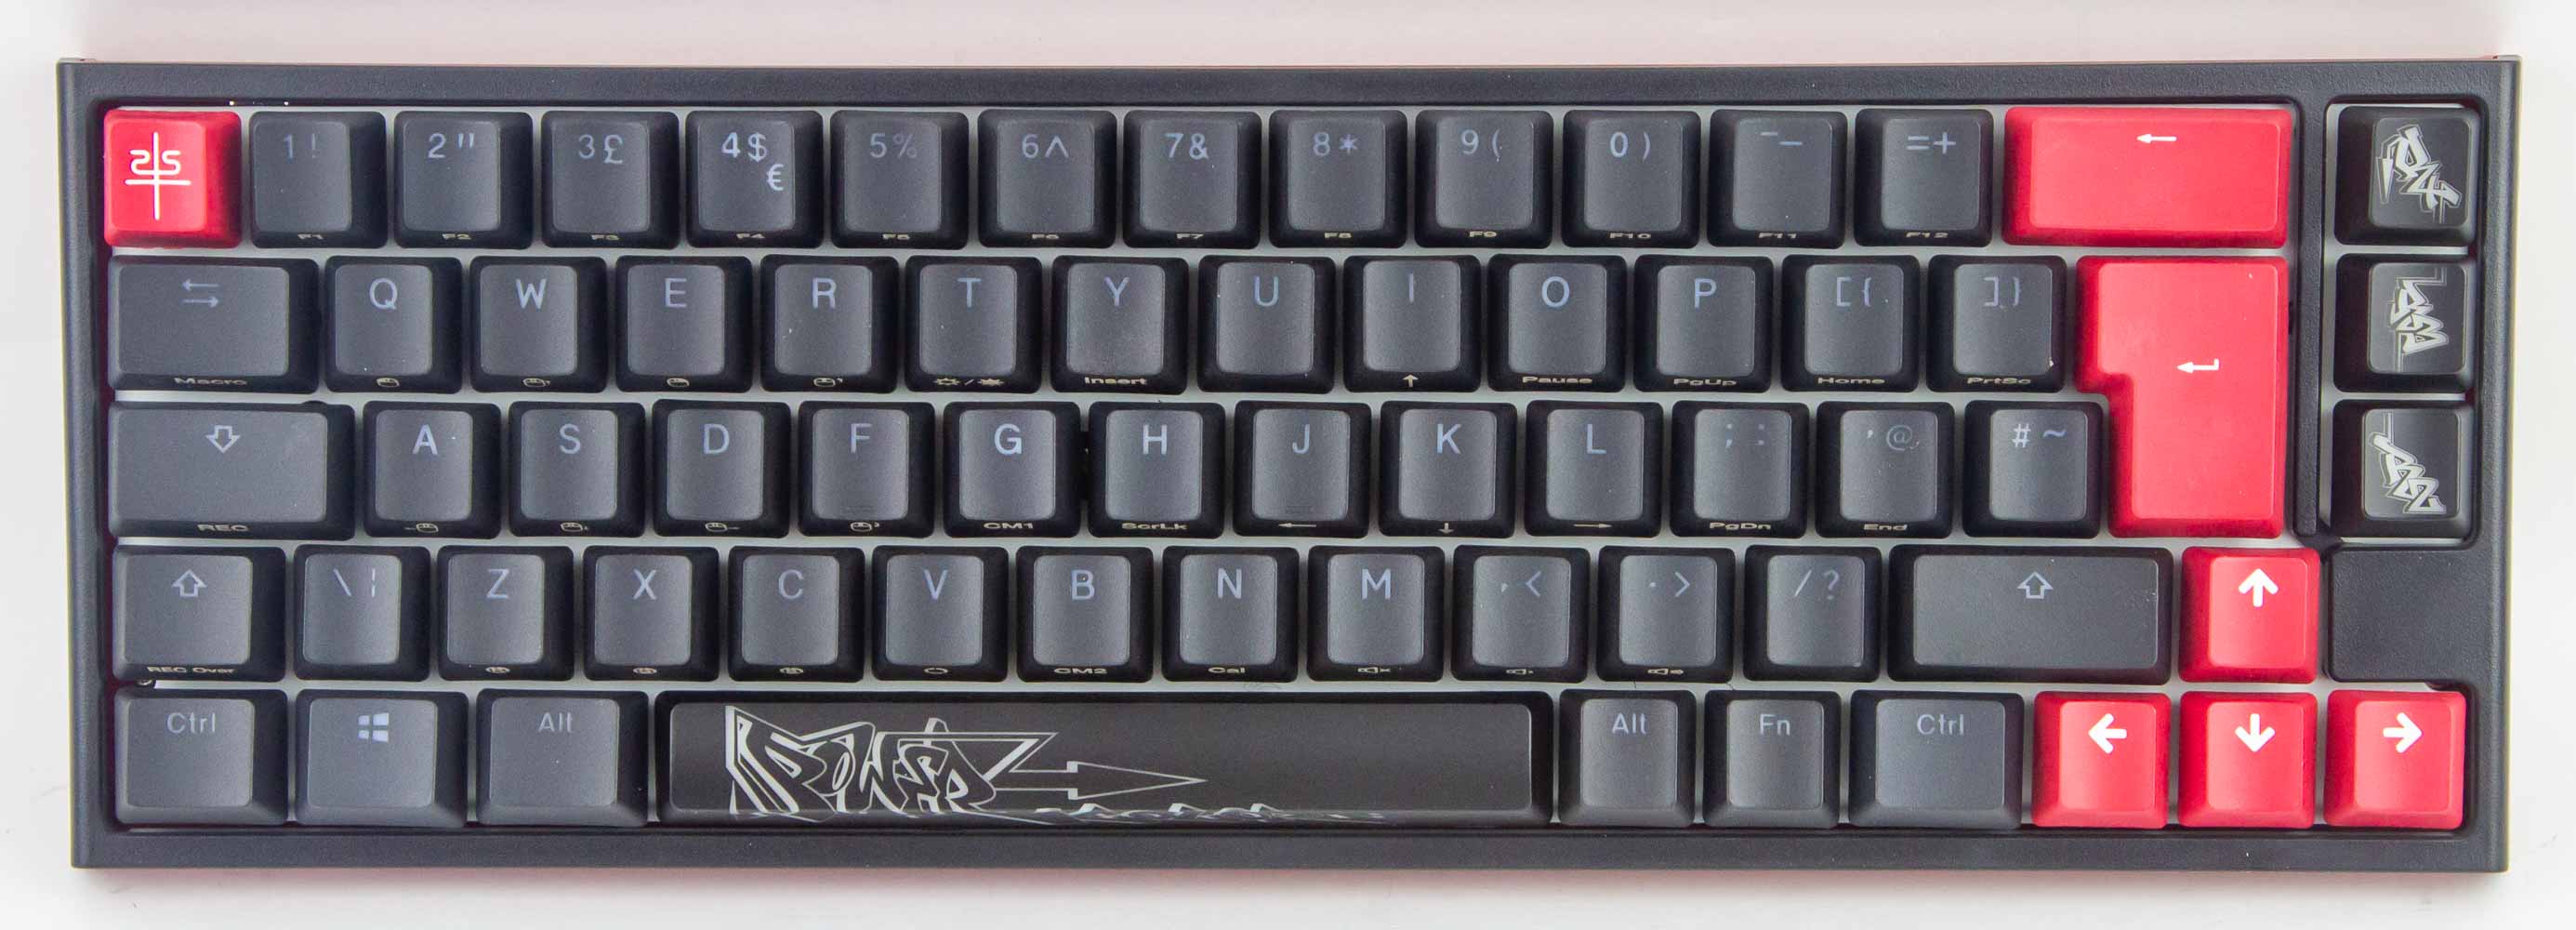 Quick Look: PowerColor x Ducky One 2 SF | TechPowerUp